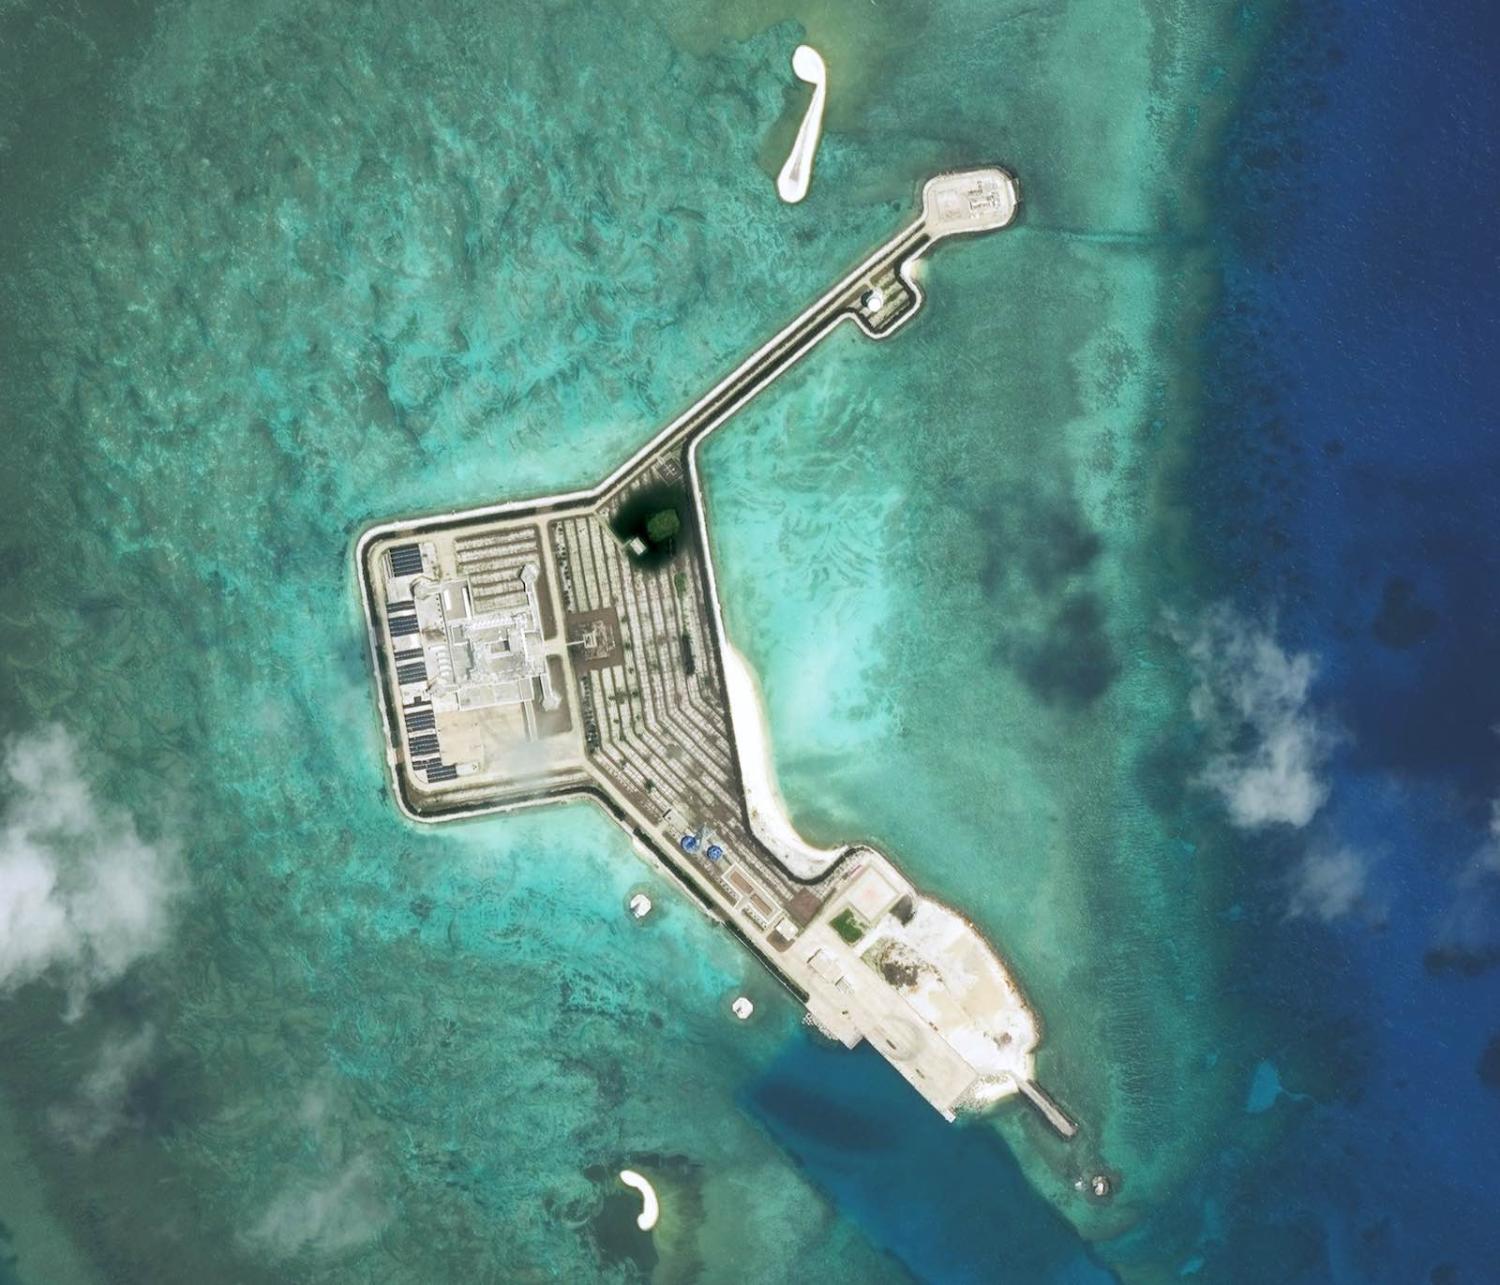 Structures constructed by China on the Gaven Reefs in the Tizard Bank of the Spratly Islands in the South China Sea (DigitalGlobe via Getty Images)